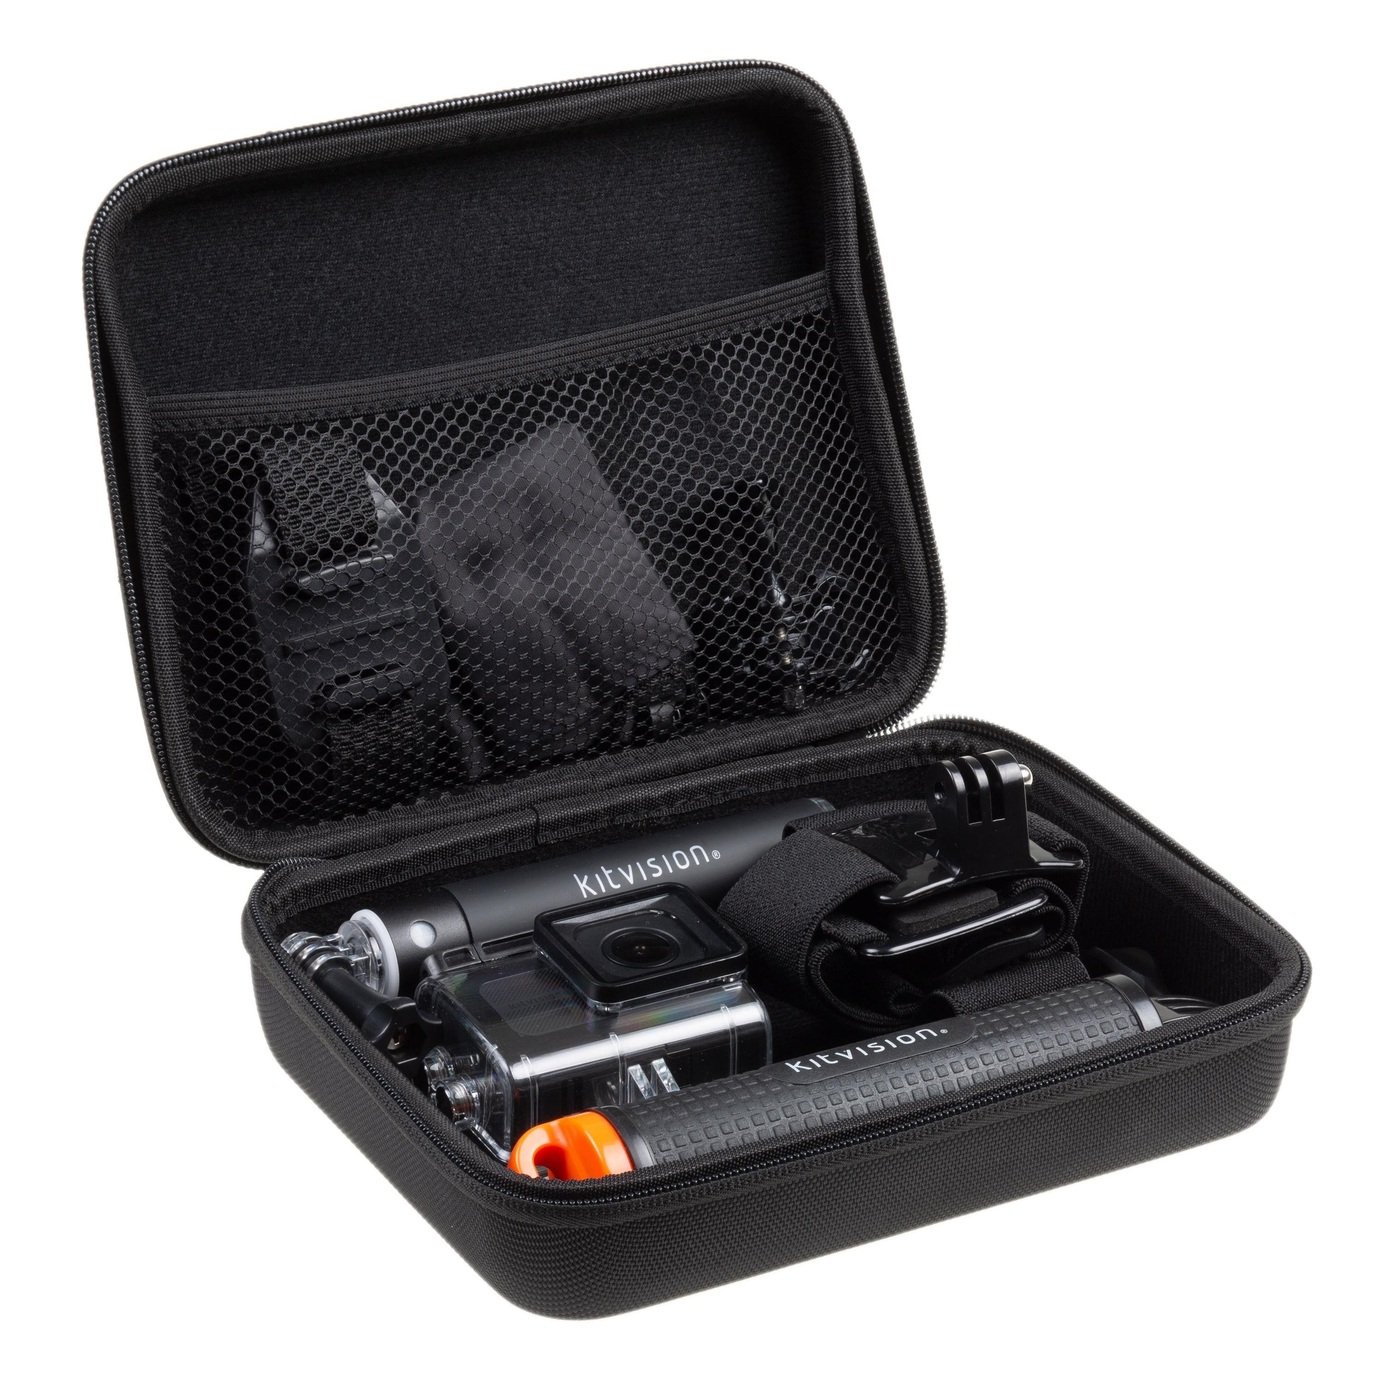 Kitvision Travel Case for Action Cameras Review